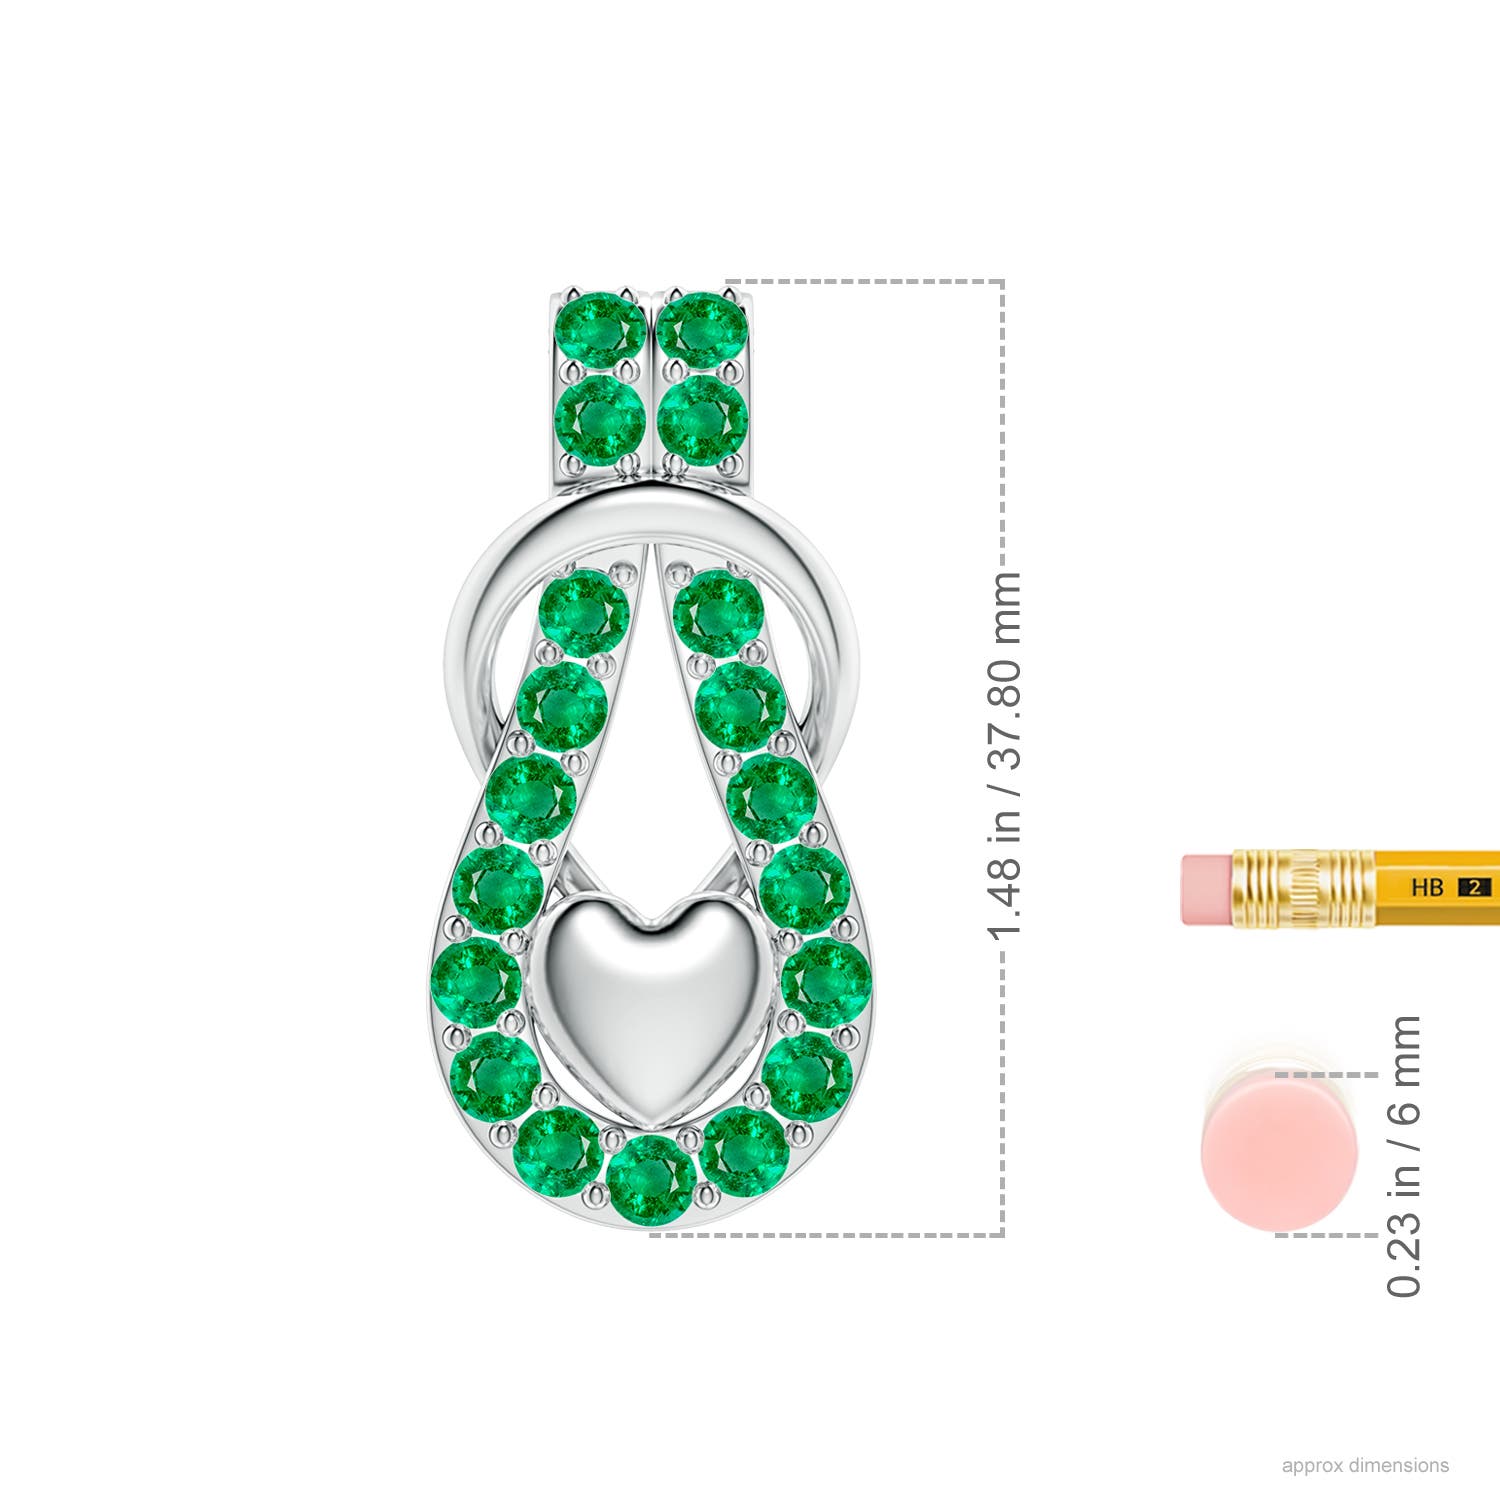 AAA - Emerald / 2.85 CT / 14 KT White Gold